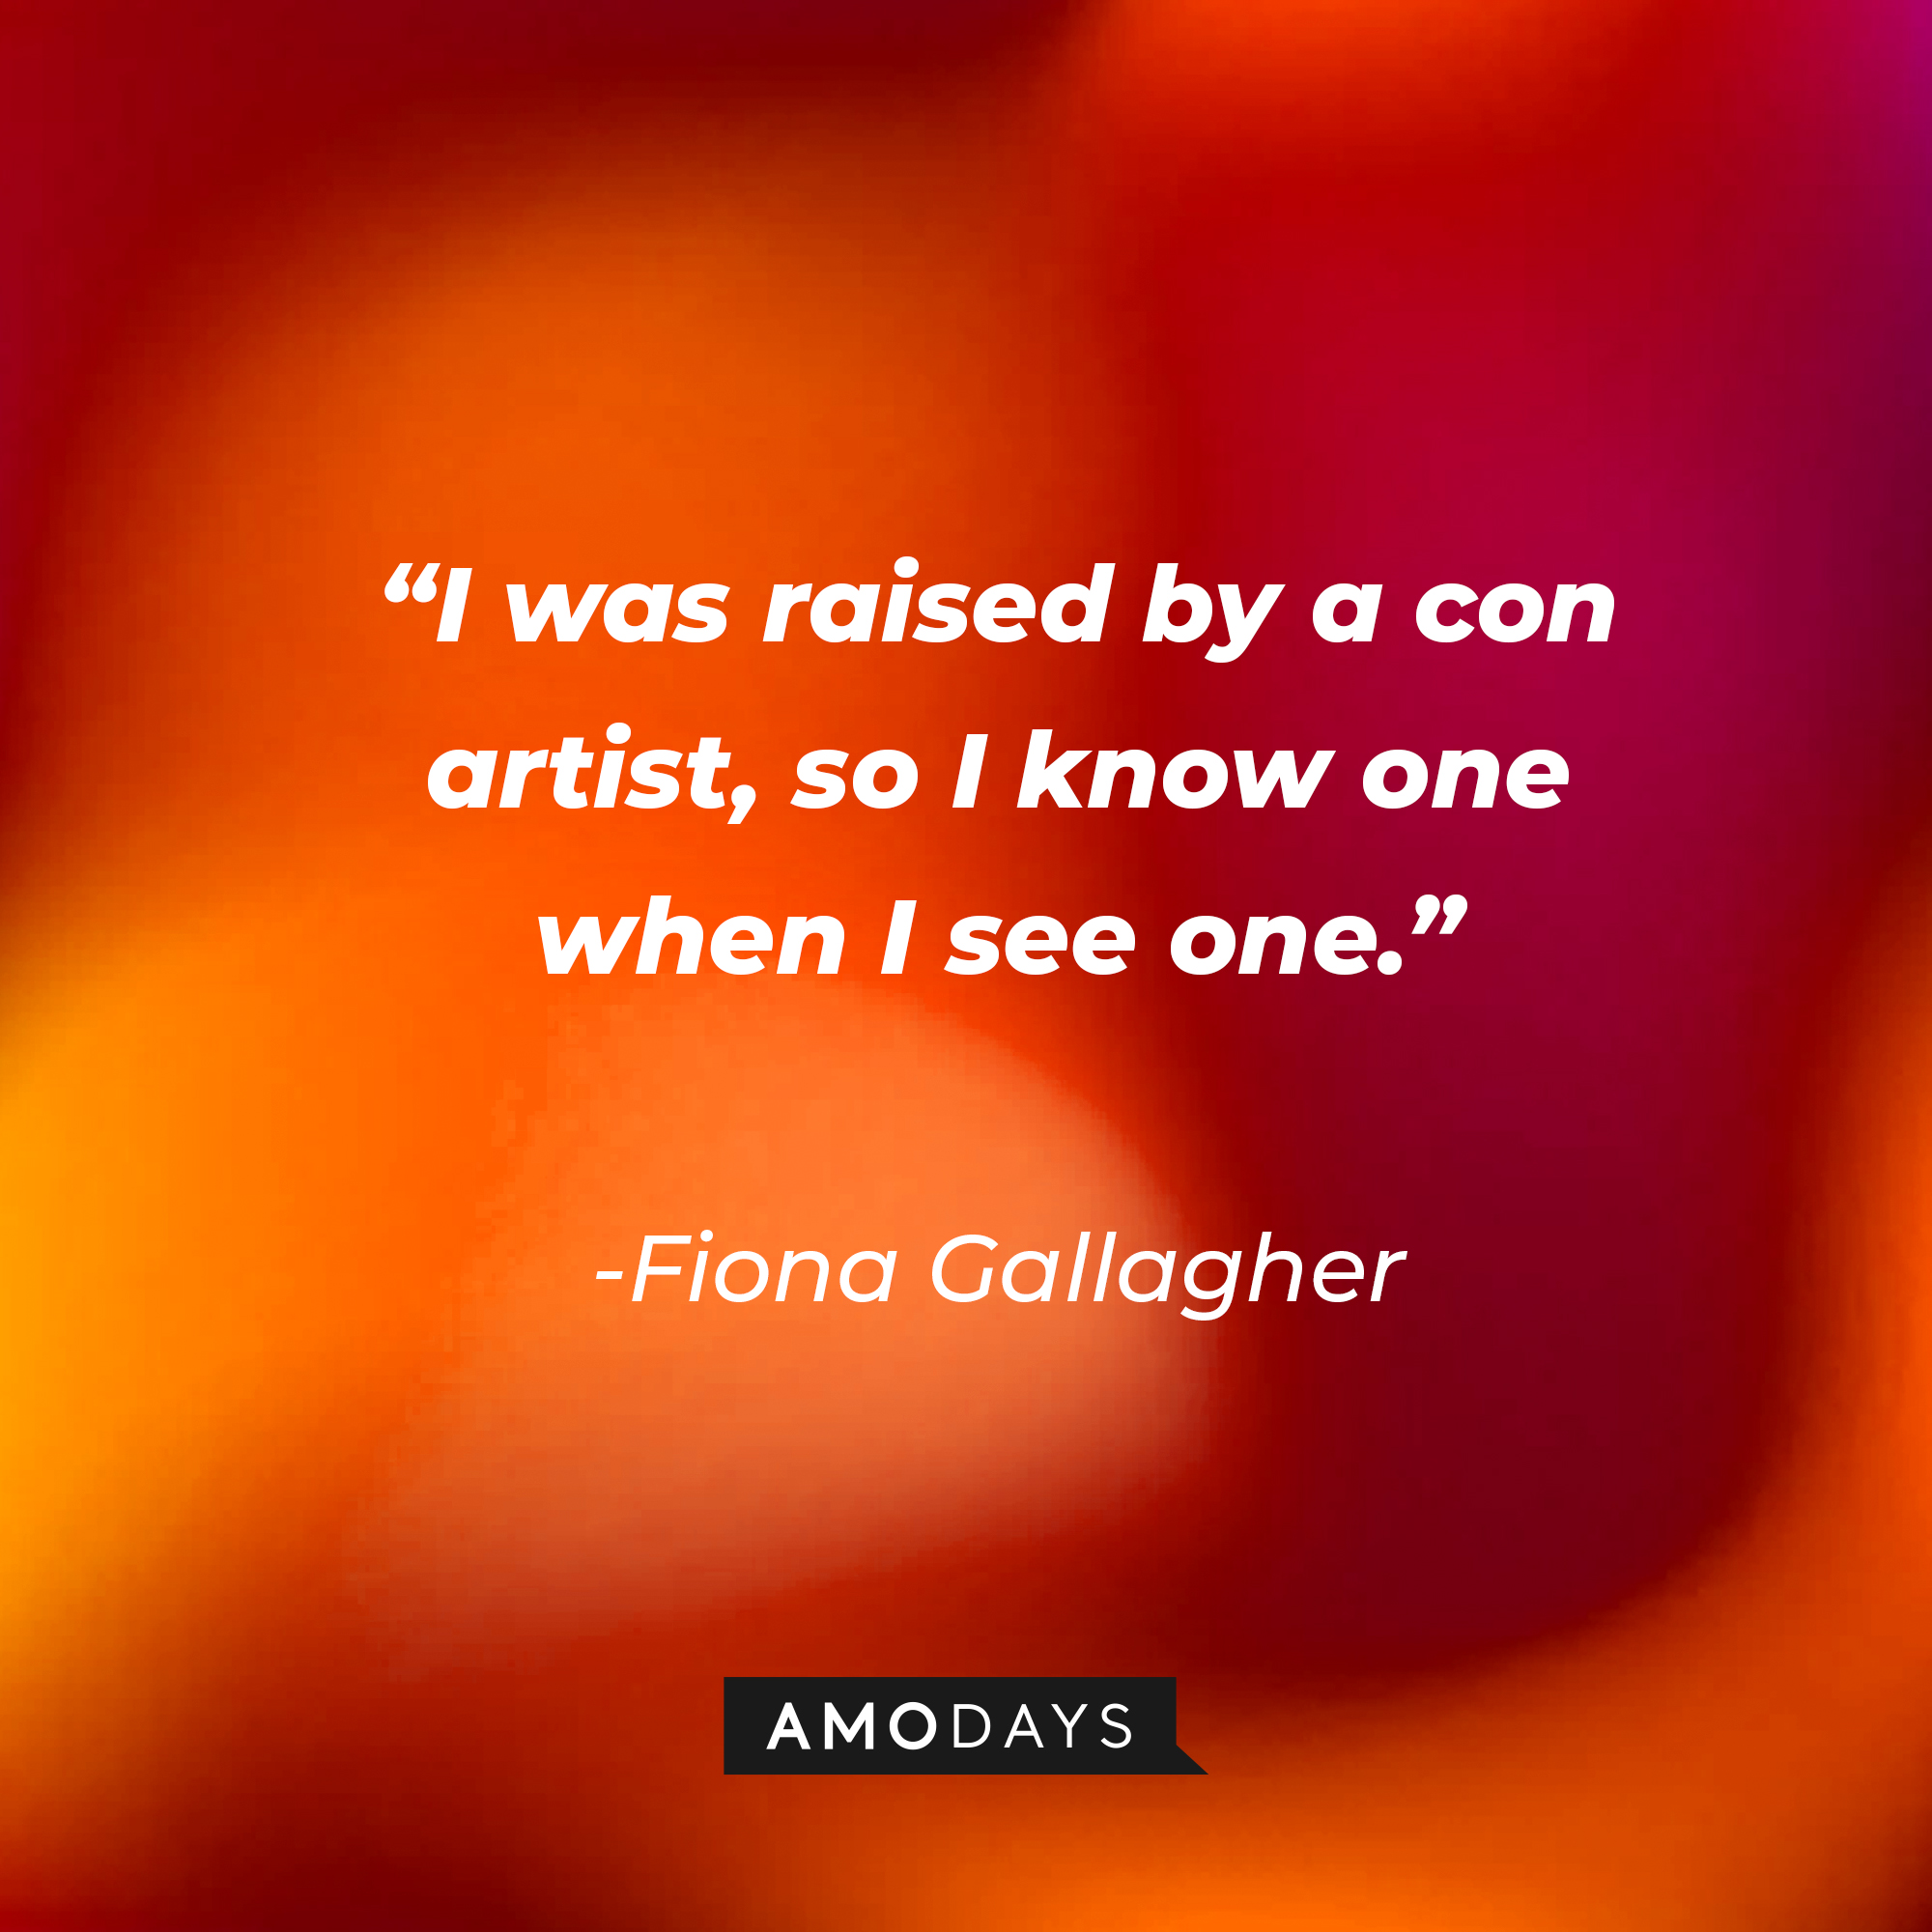 Fiona Gallagher’s quote:“I was raised by a con artist, so I know one when I see one.” | Source: AmoDays